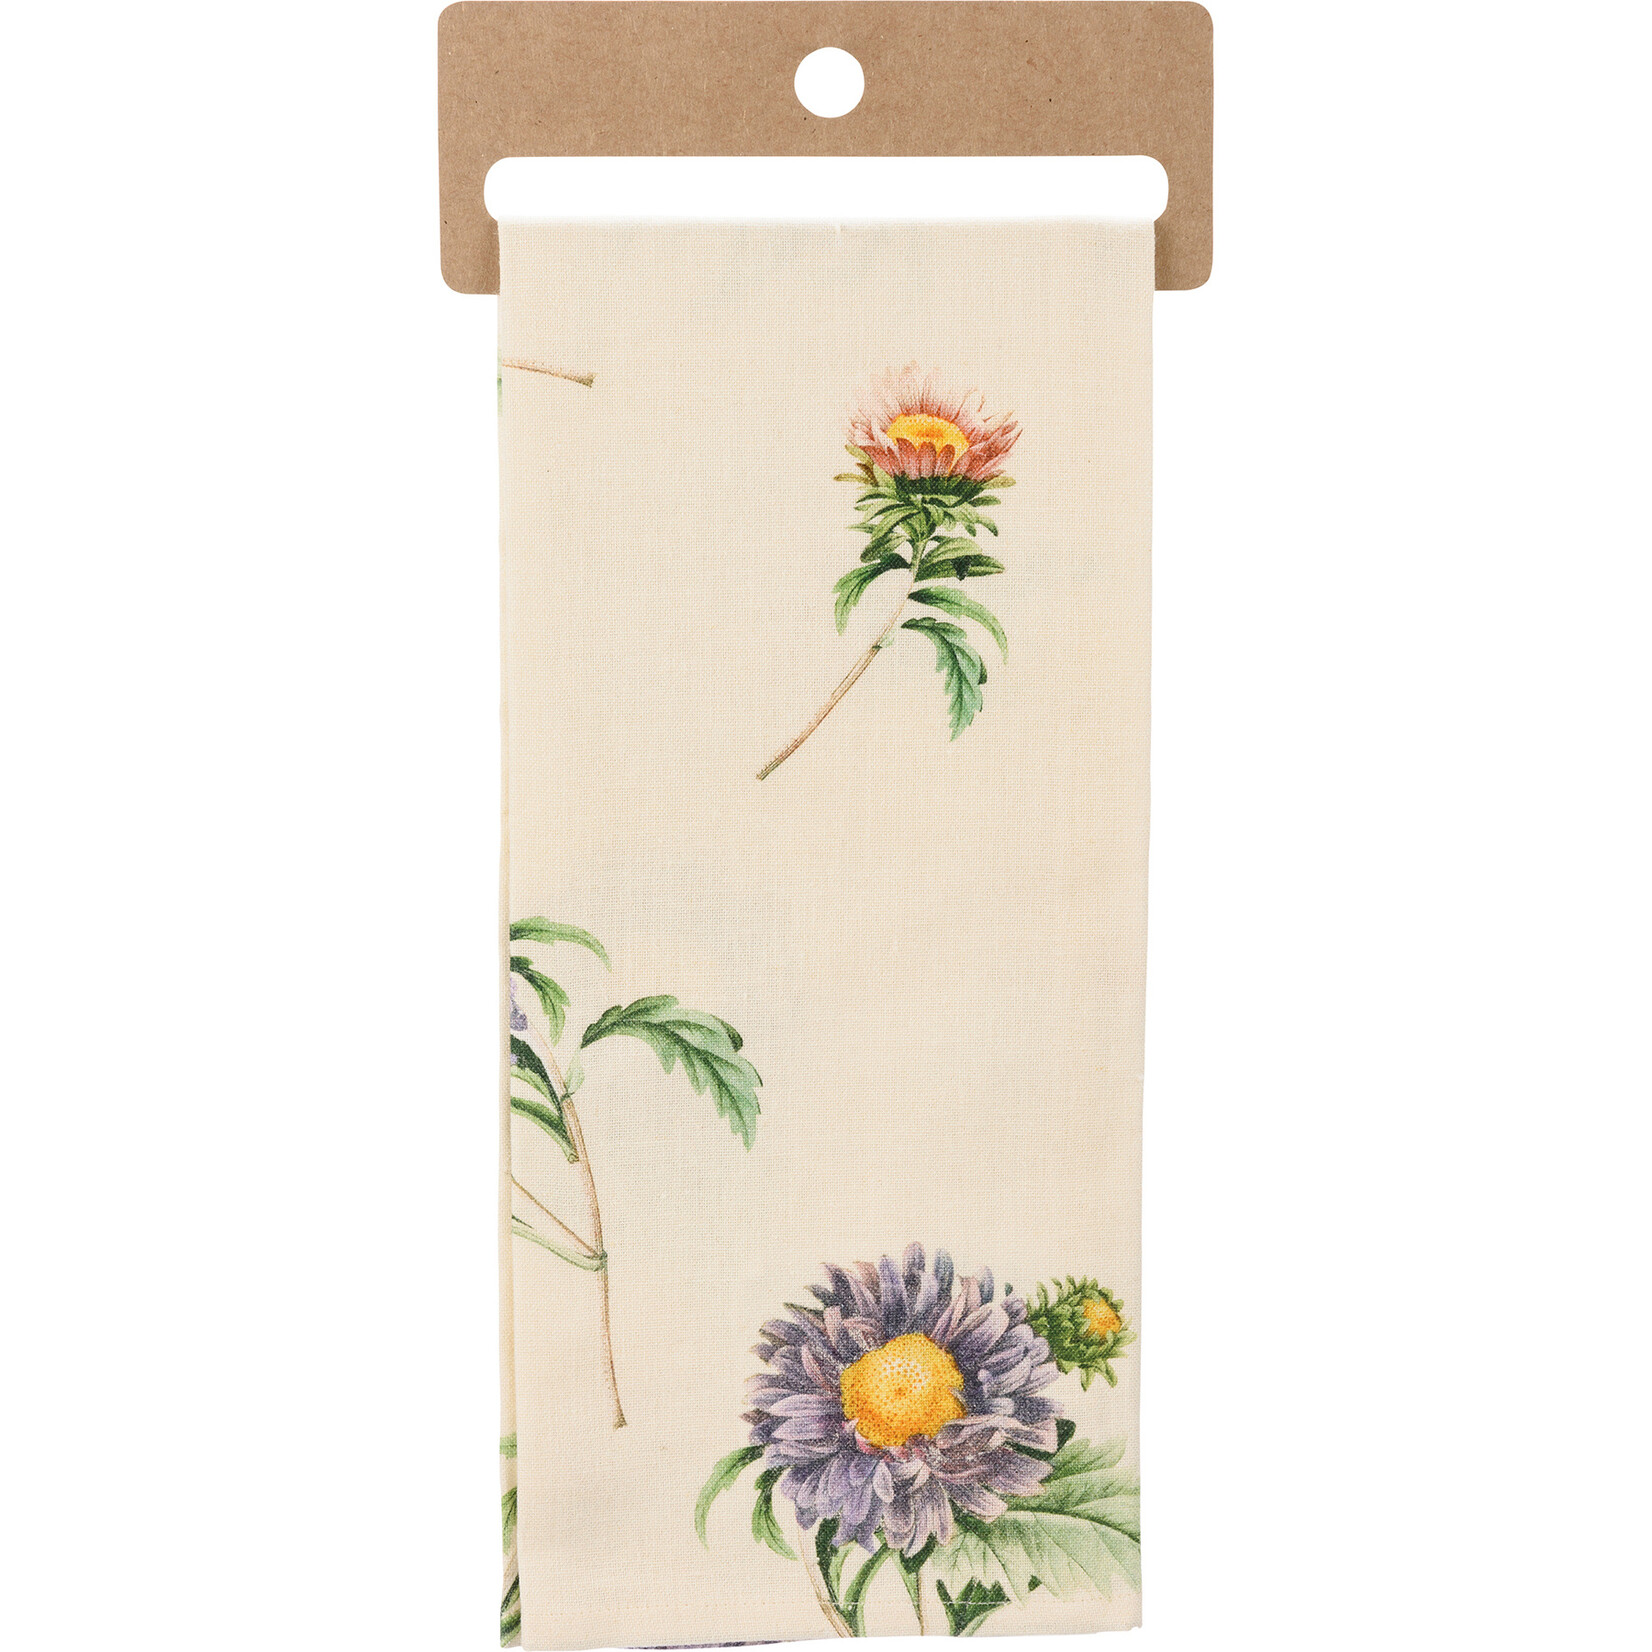 Primitives by Kathy Primitives by Kathy You Bet Your Sweet Aster Kitchen Towel